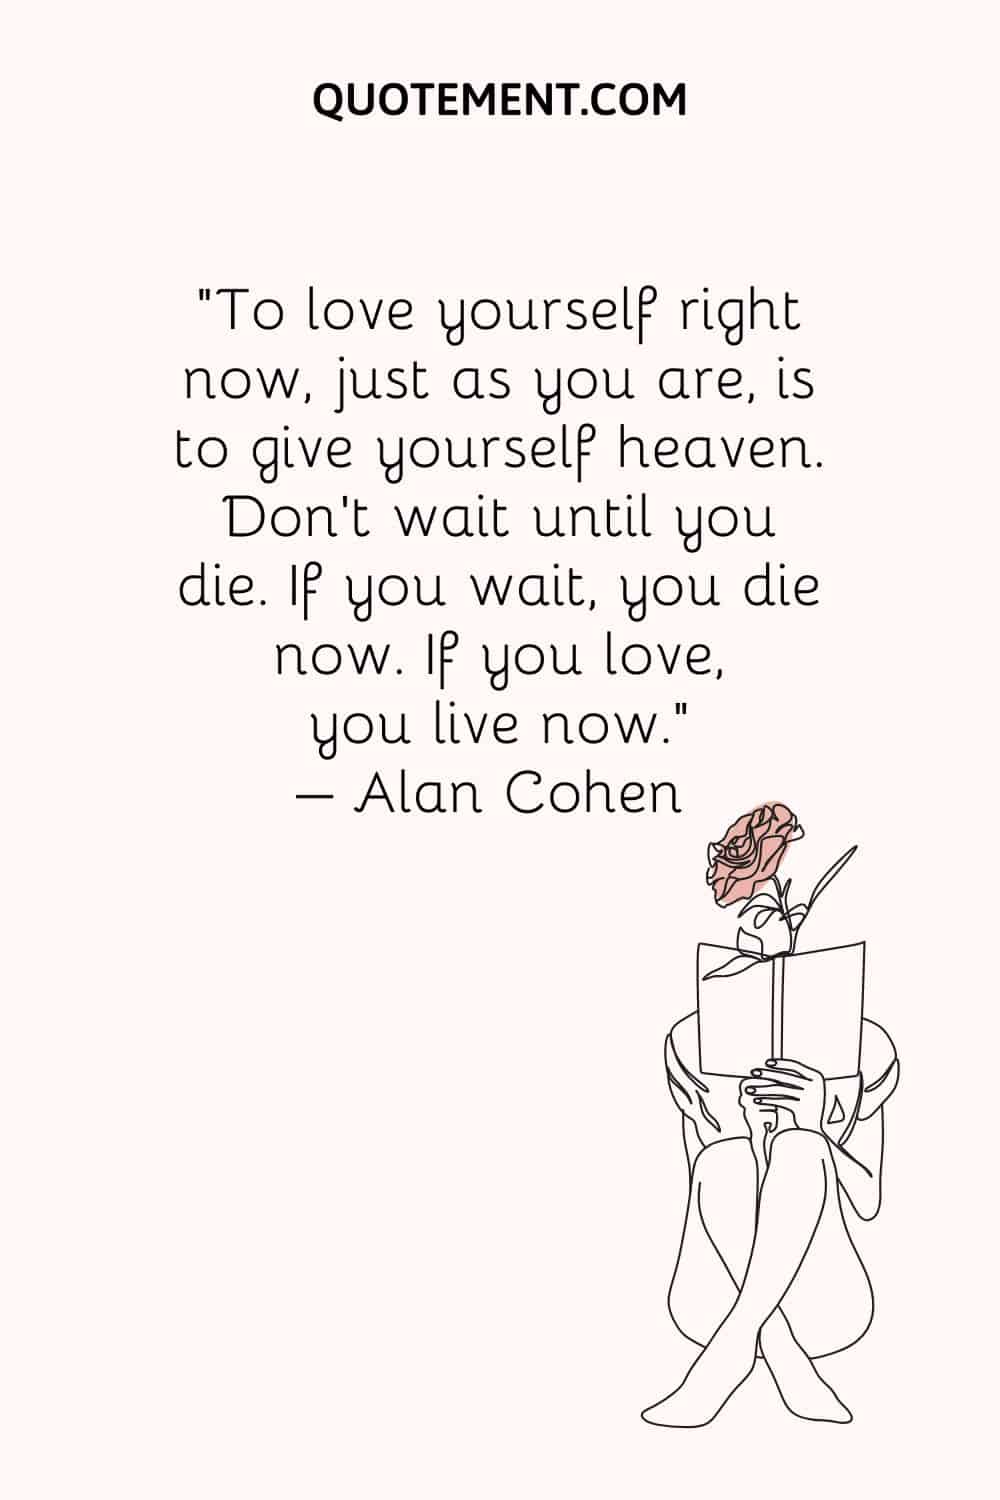 To love yourself right now, just as you are, is to give yourself heaven